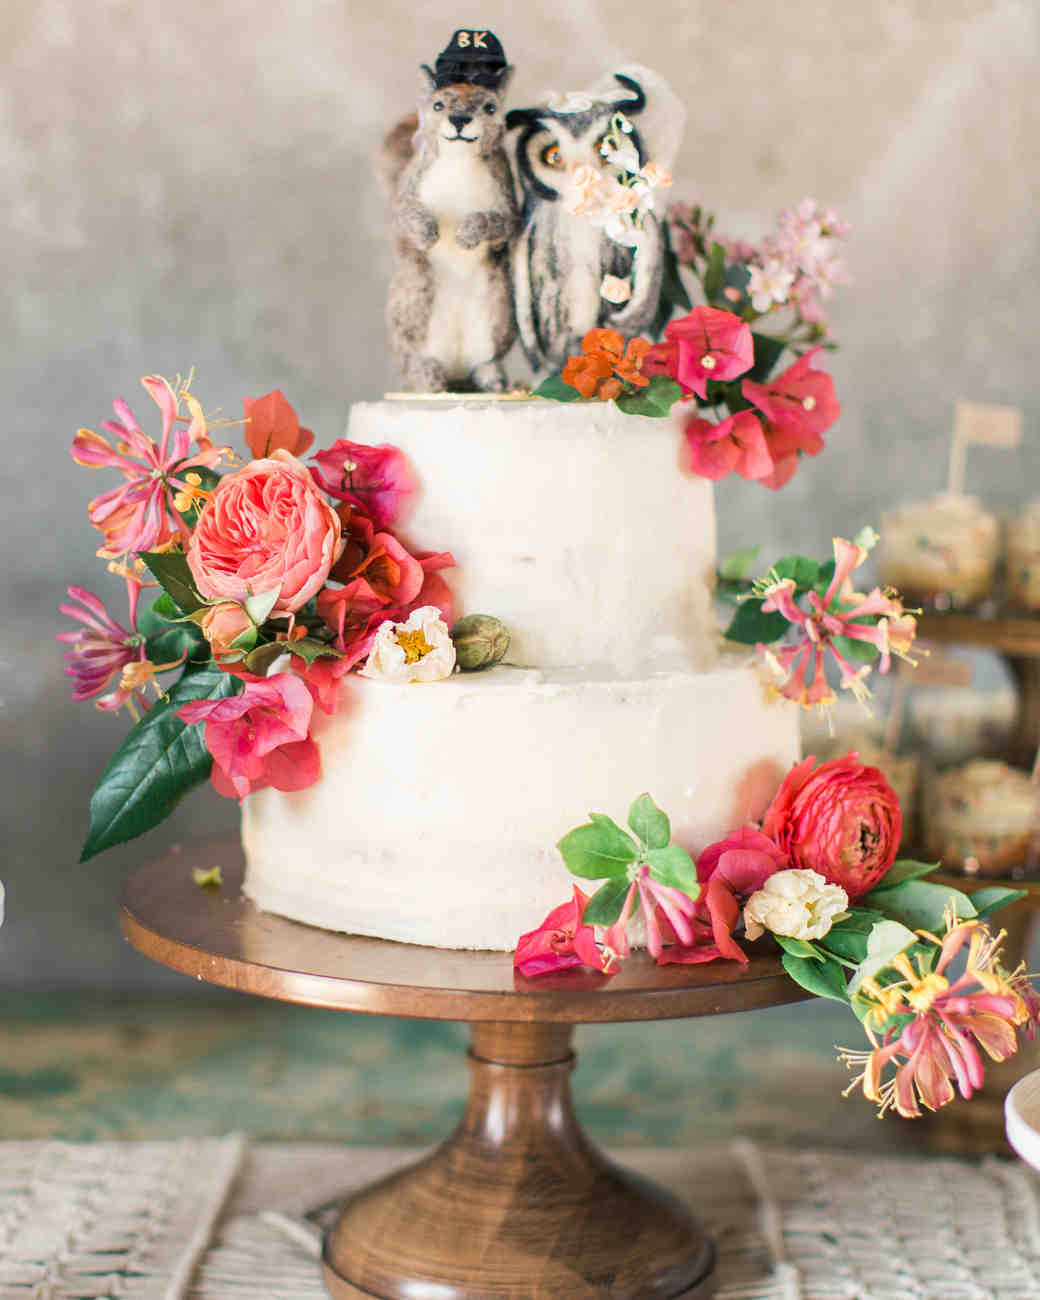 Picture Of Wedding Cakes
 The 25 Best Wedding Cakes